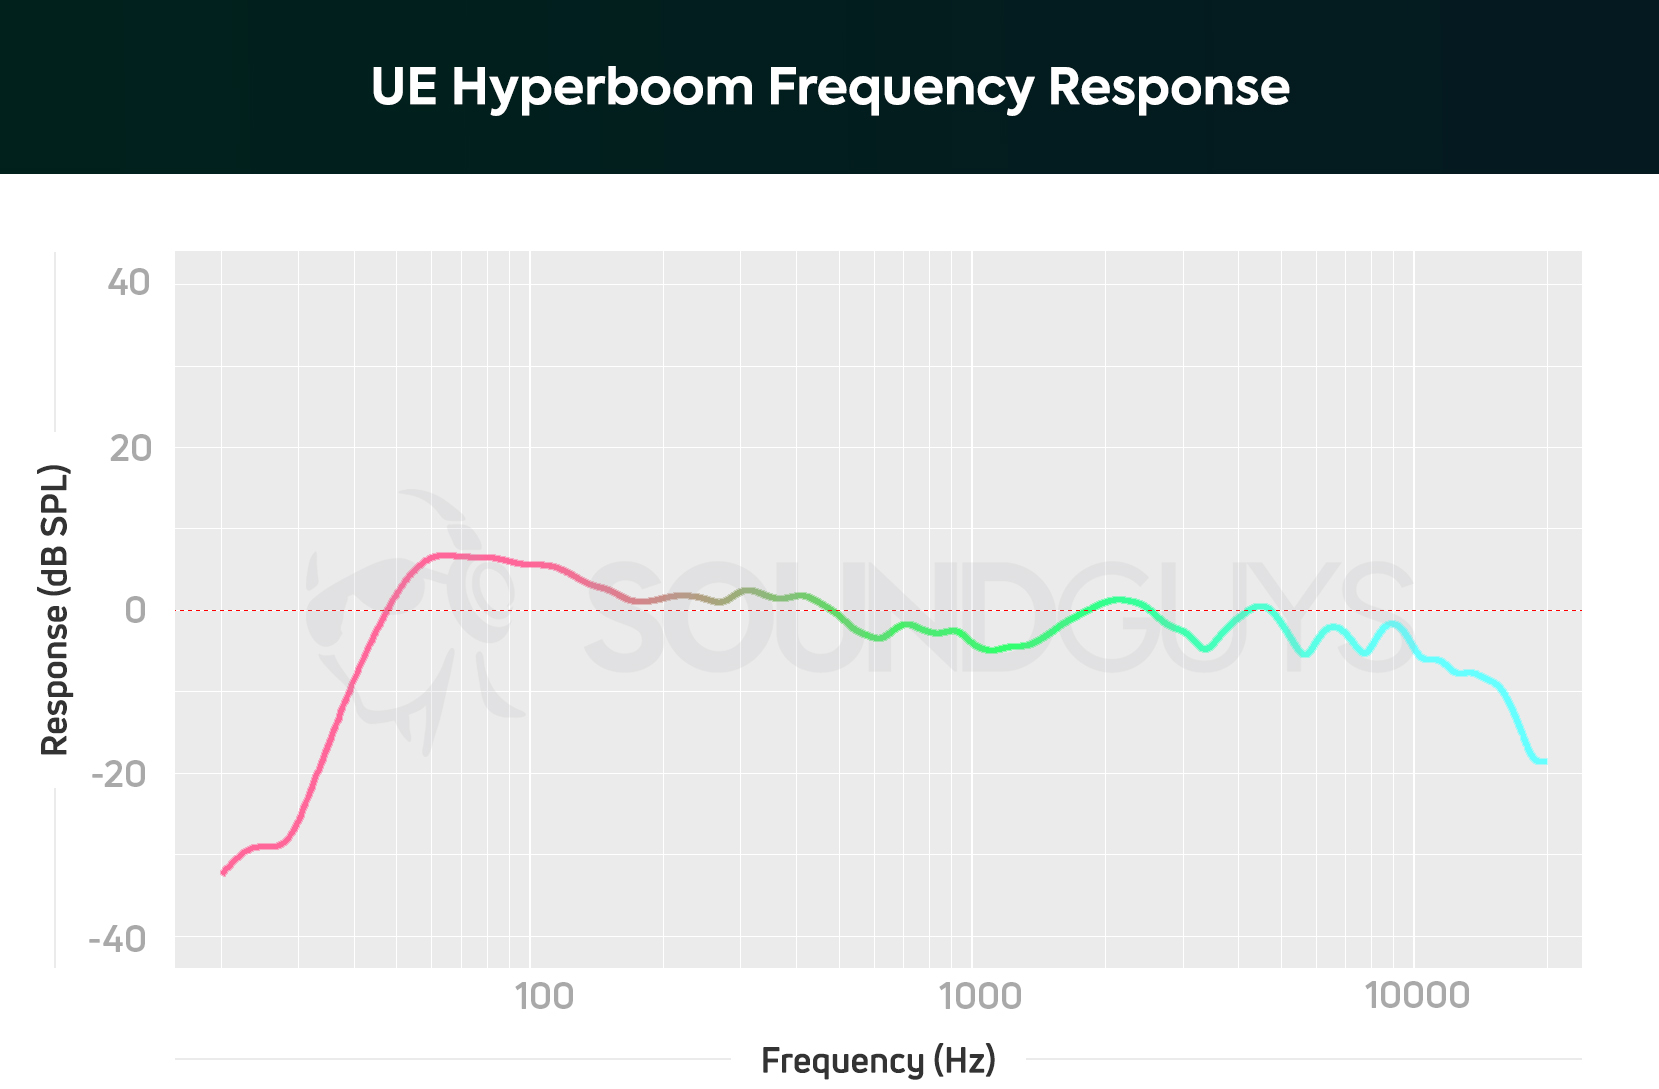 Frequency response graph of UE Hyperboom showing a slight hump around the 100Hz range.